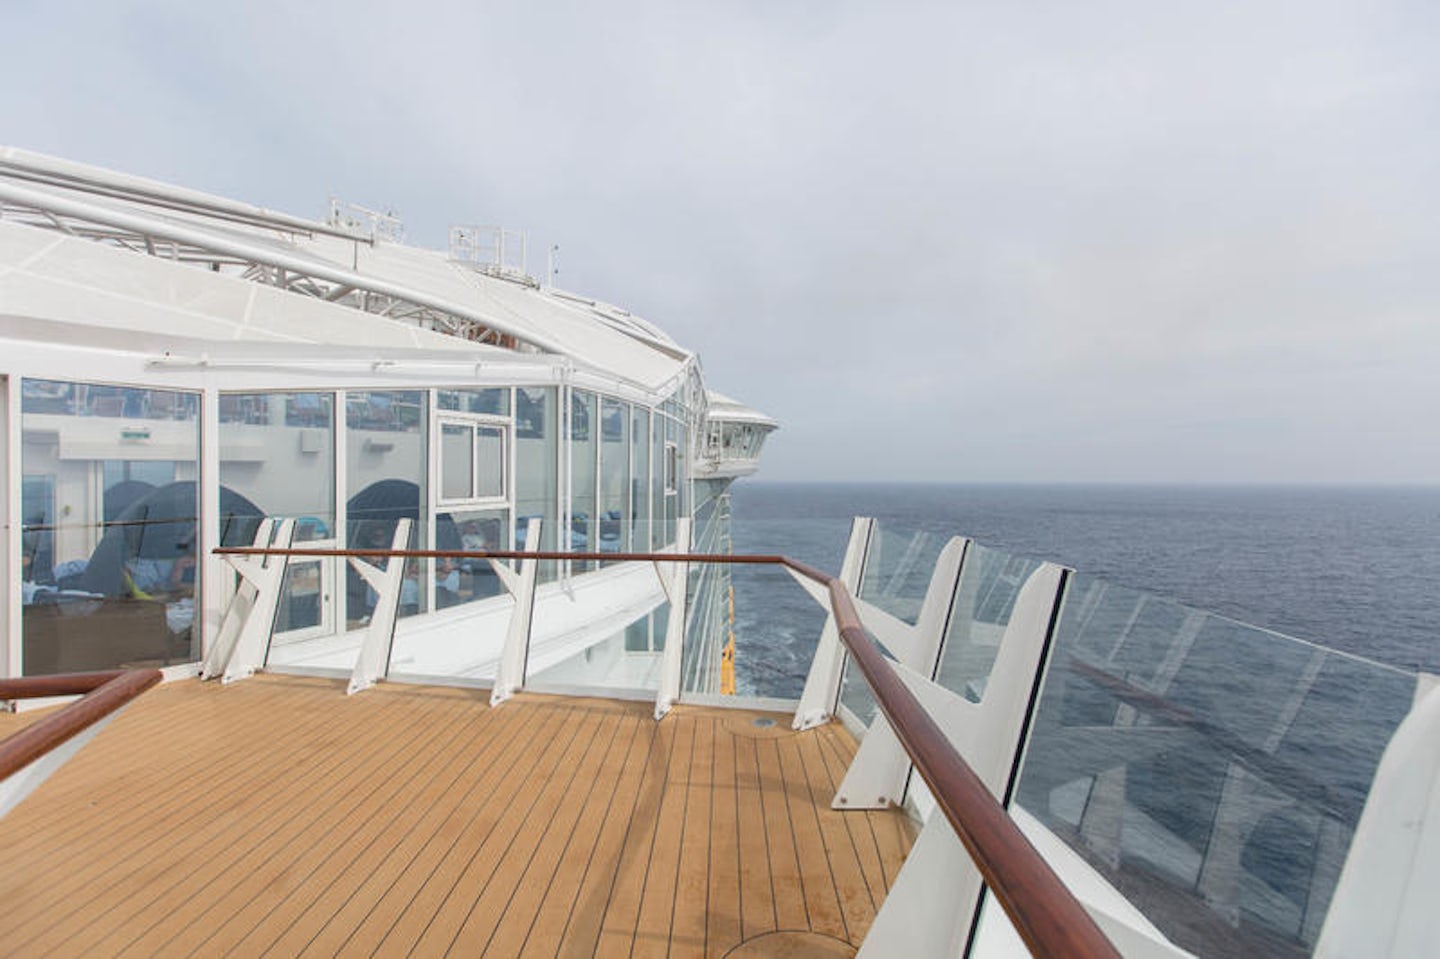 King of The World on Harmony of the Seas